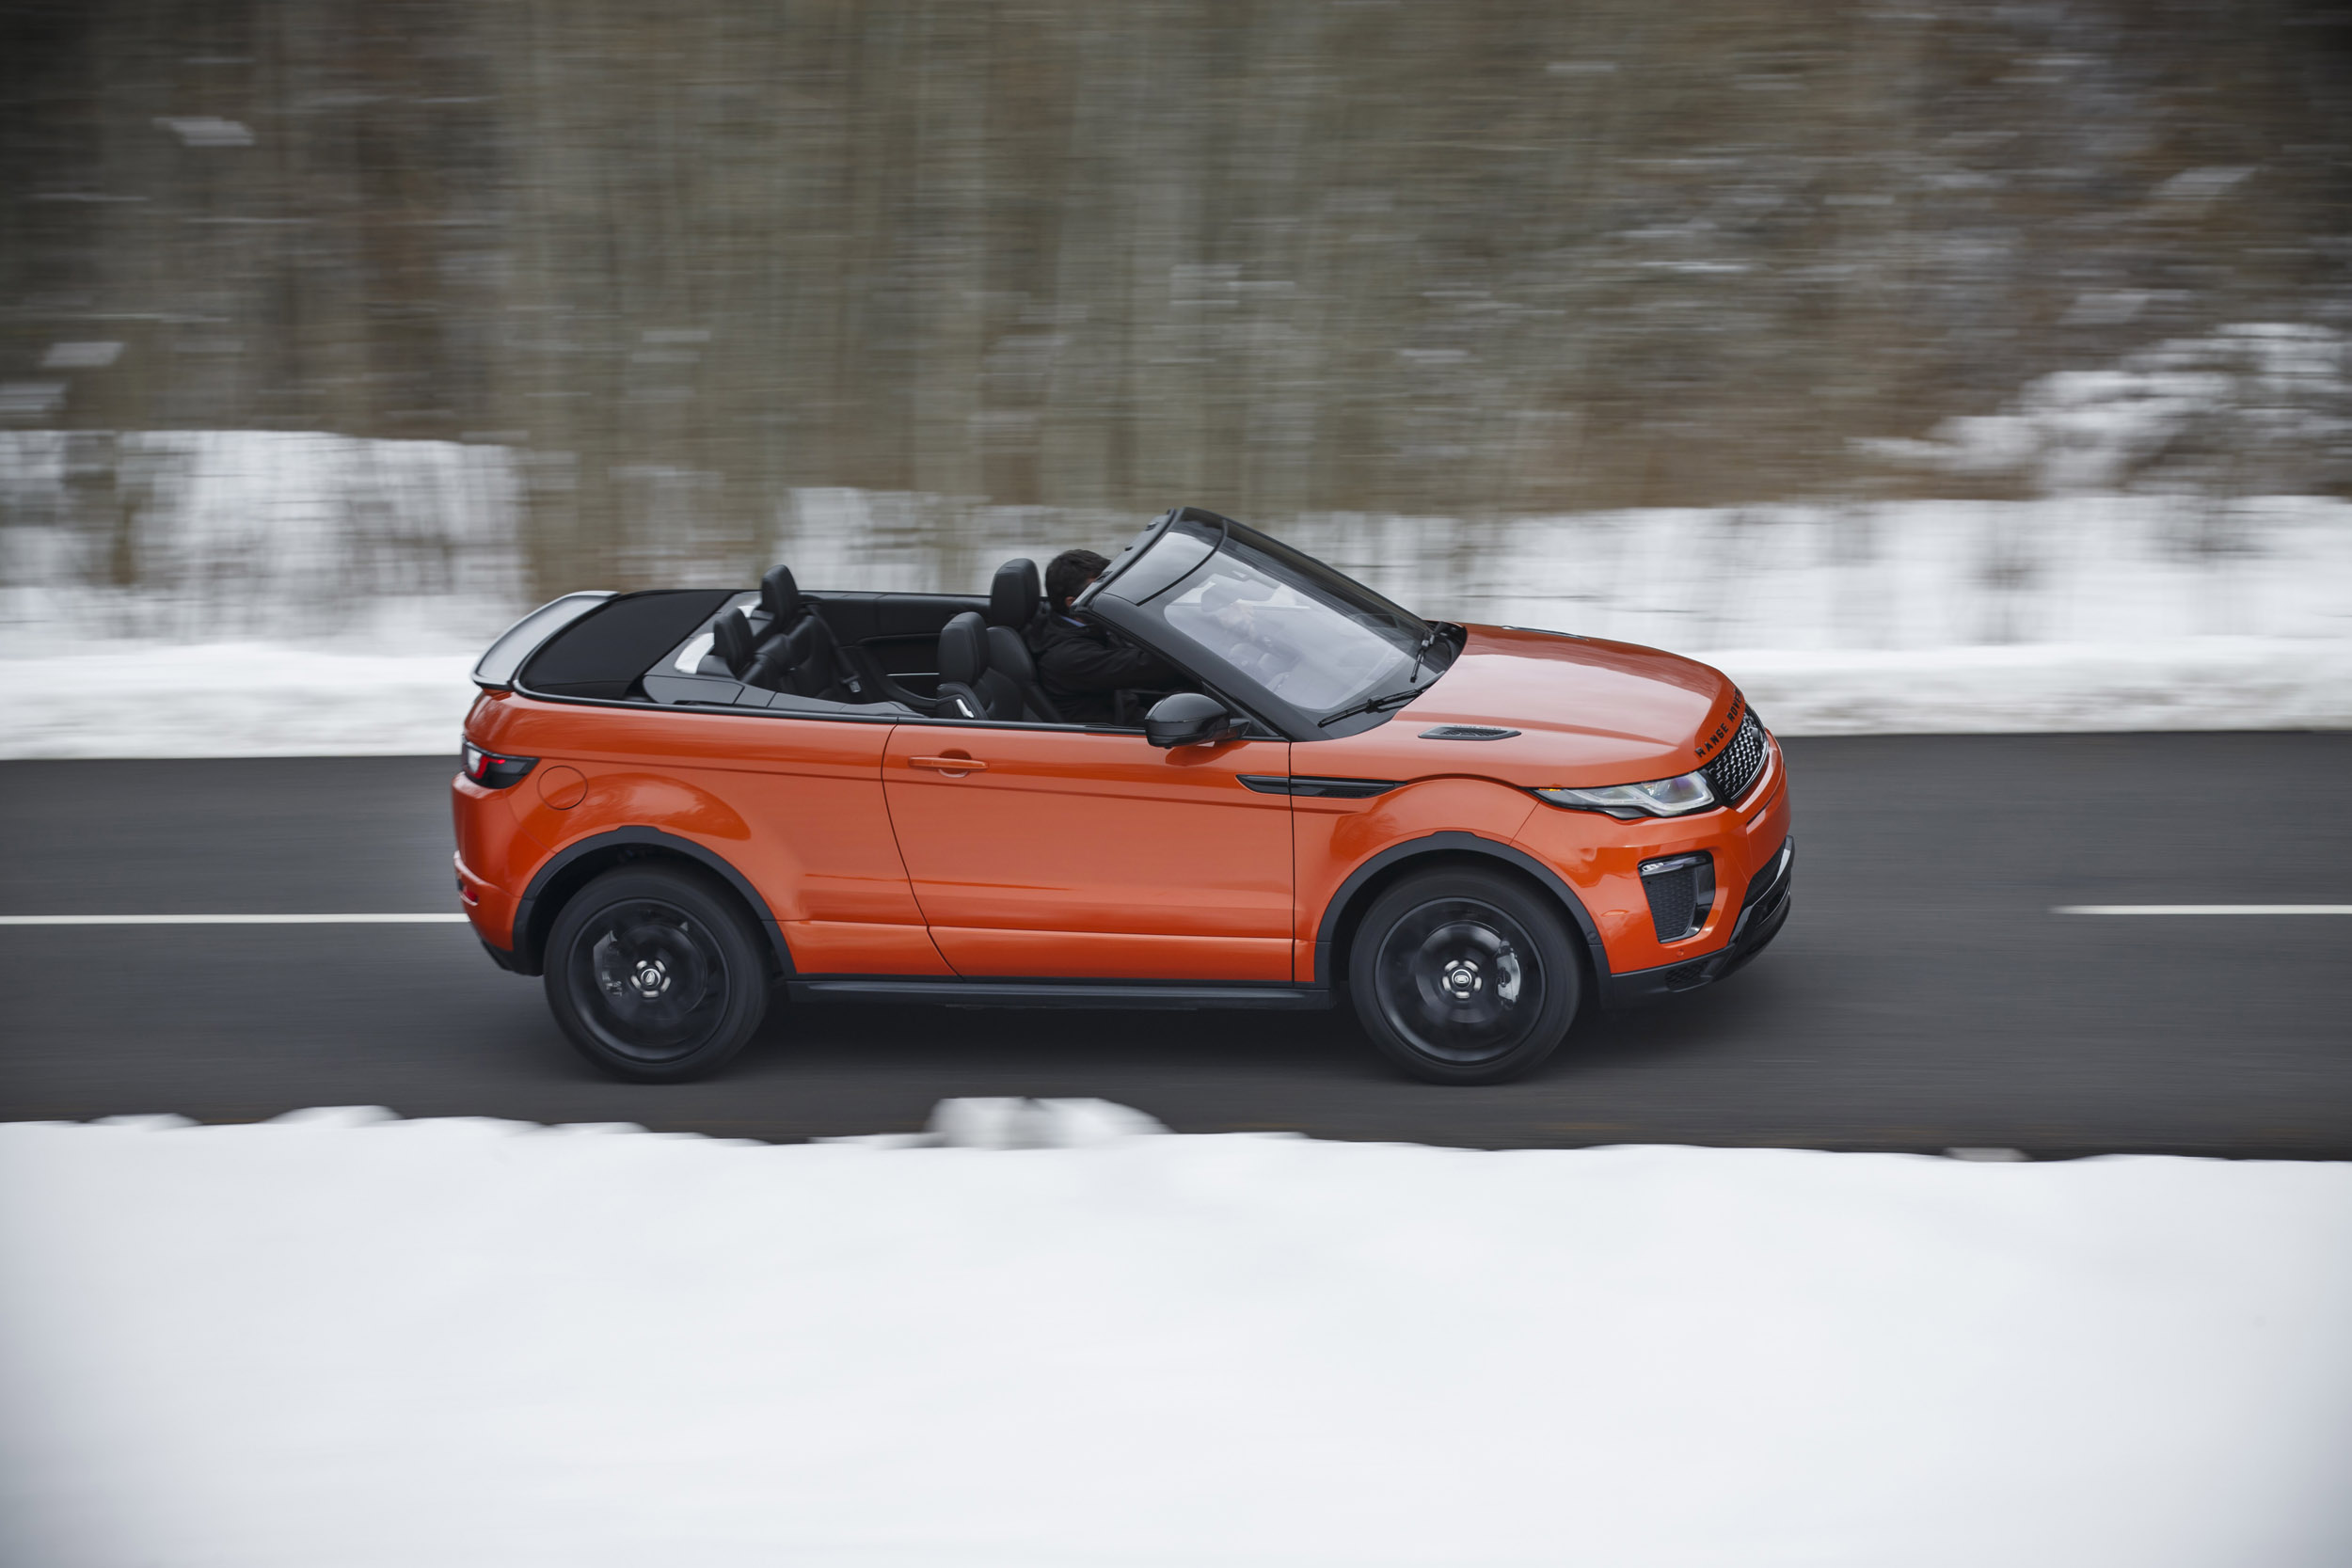 Range Rover Evoque Convertible On Road Price  - 115 Search Results For Land Rover Range Rover Evoque Convertible.